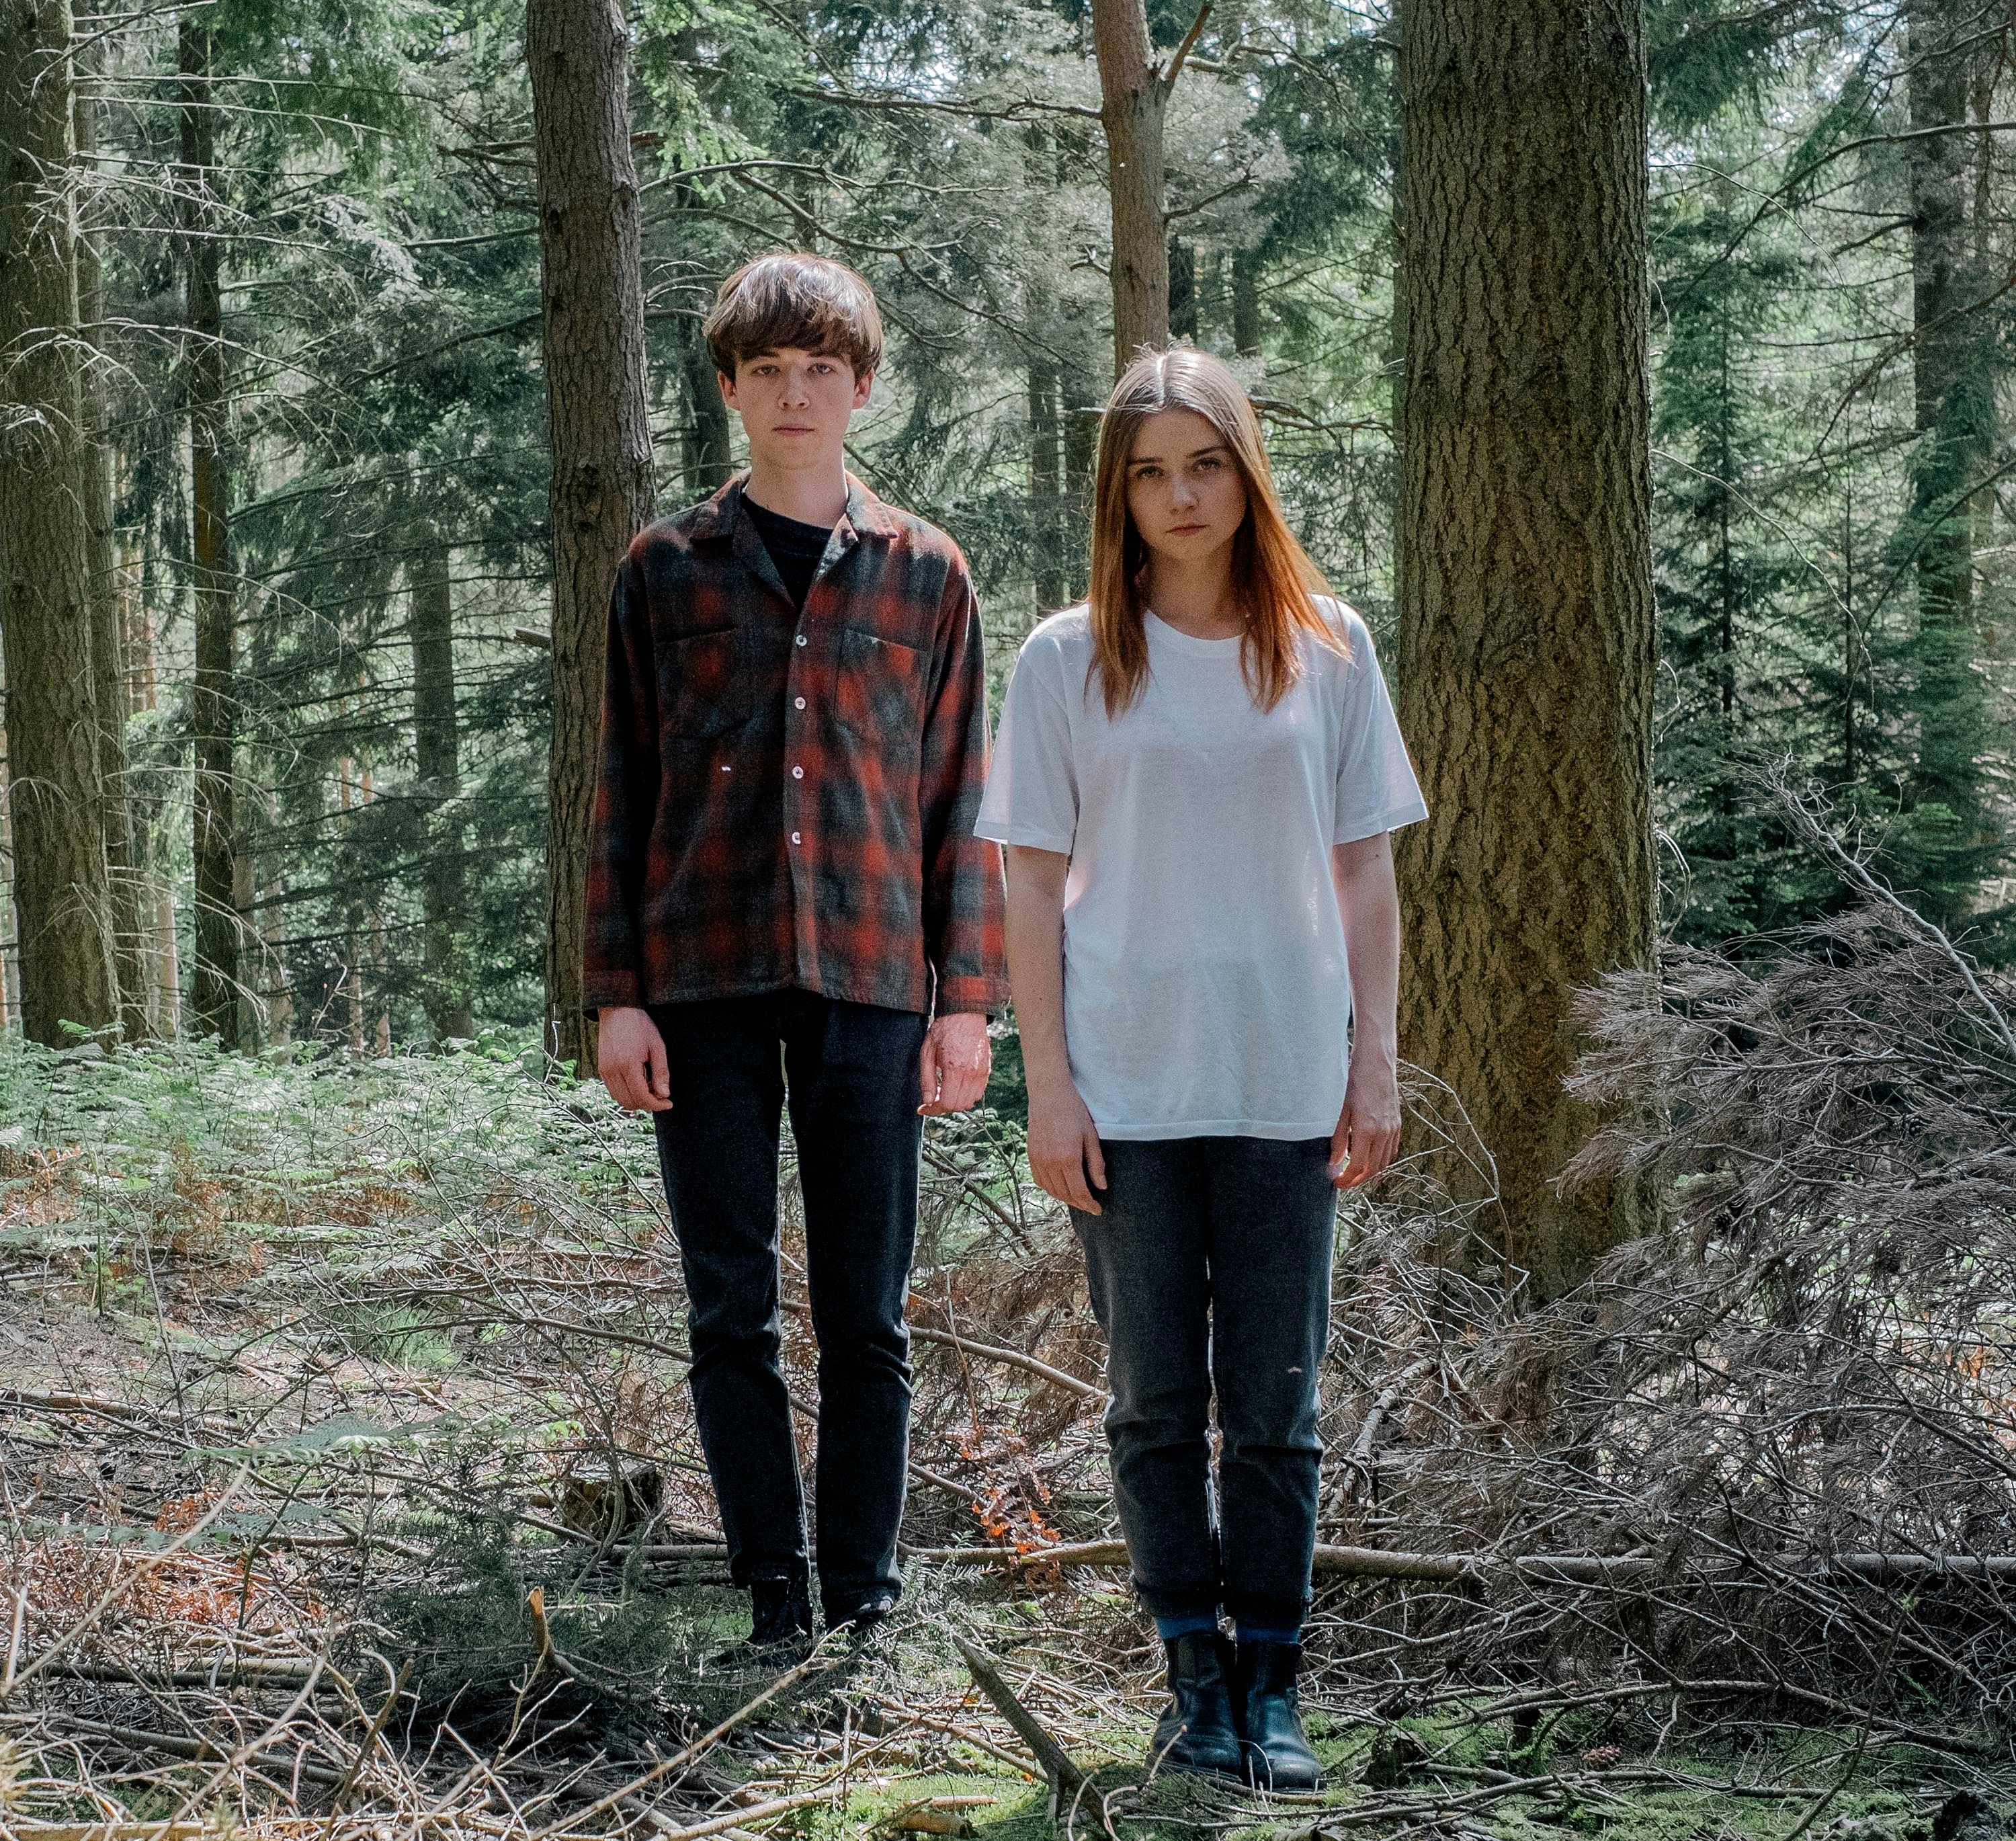 The End Of The F***ing World: - Stars Alex Lawther as James and Jessica Barden as Alyssa.